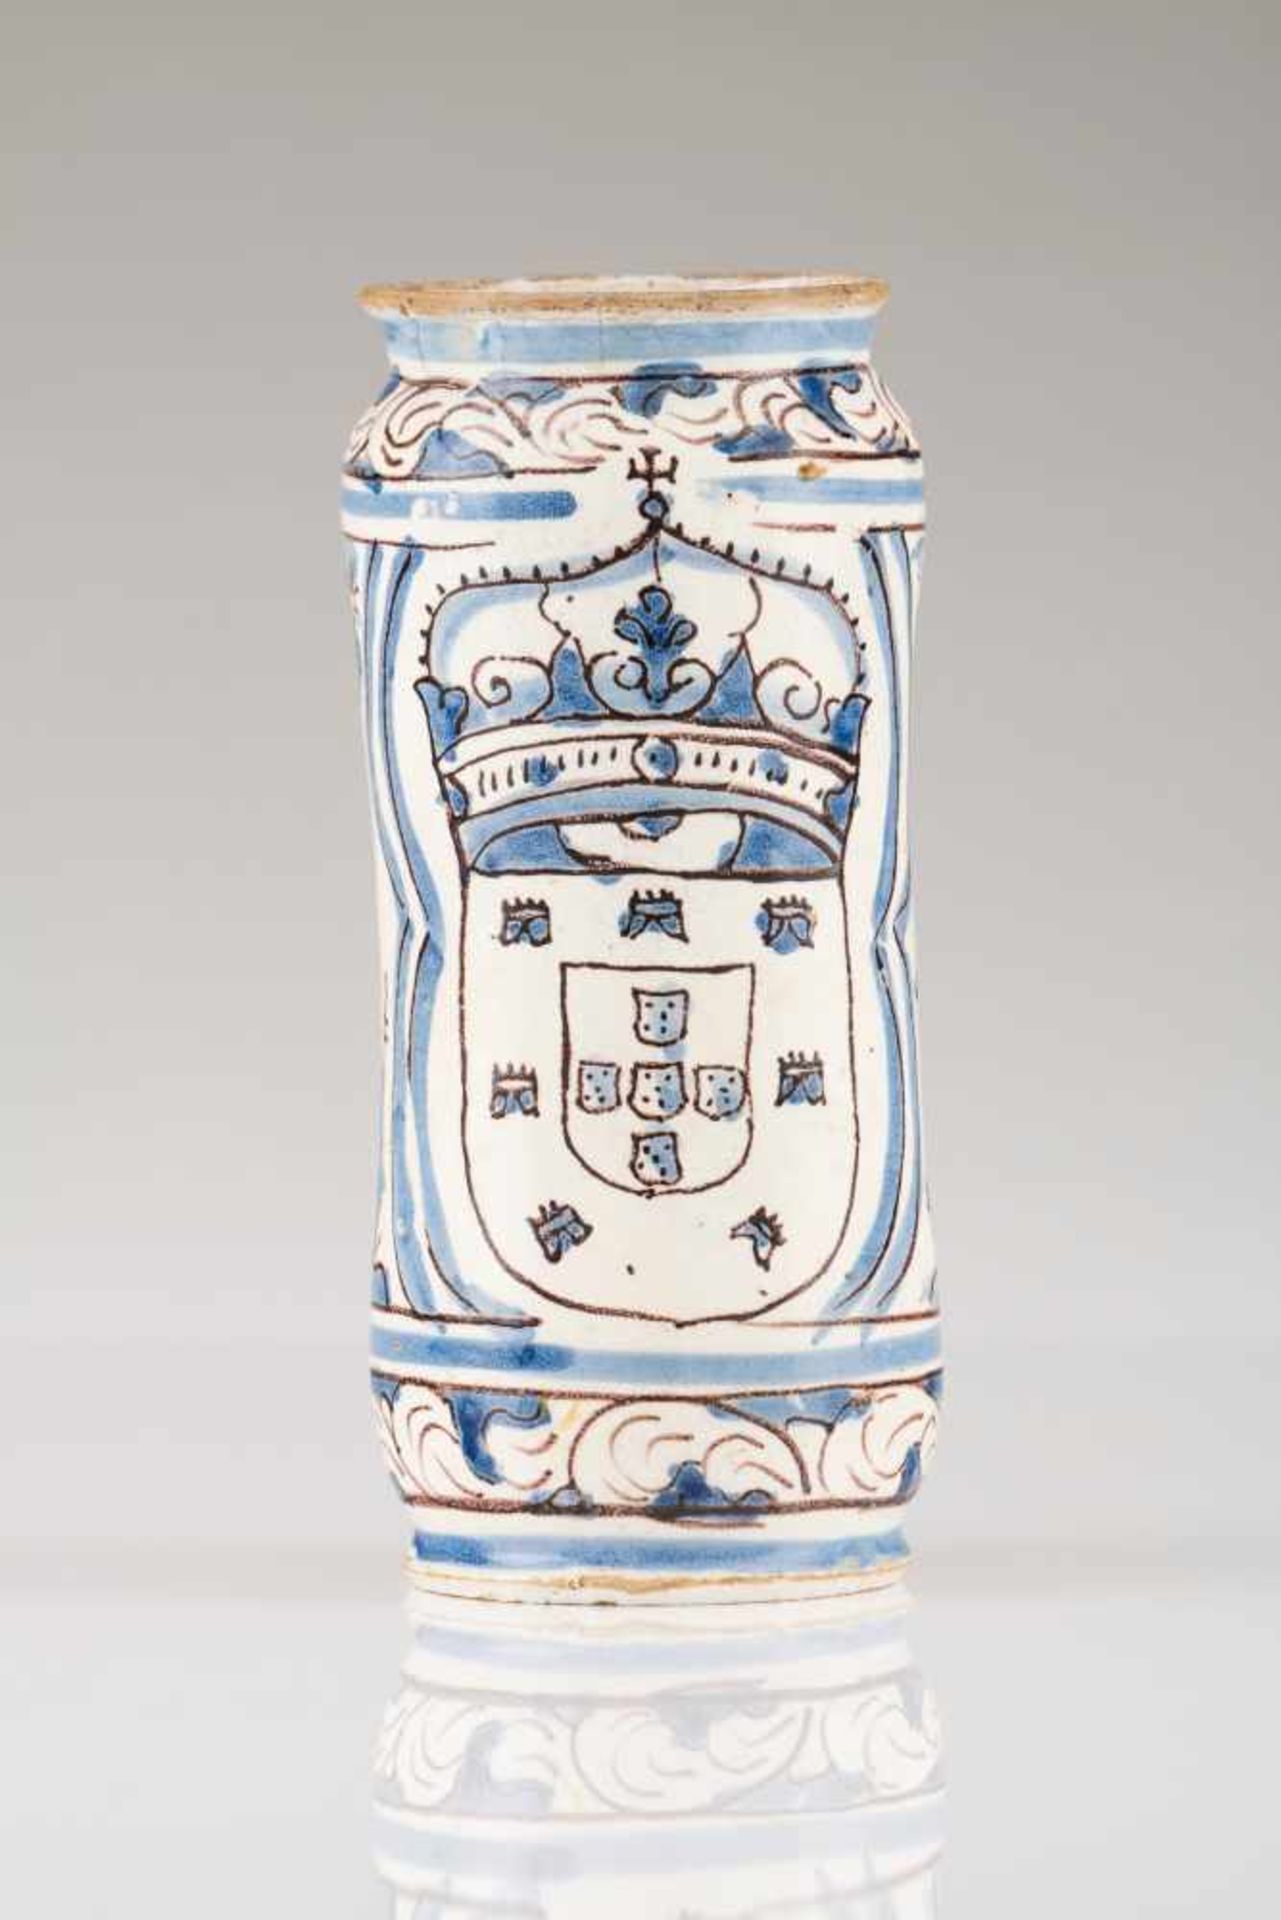 A Pharmacy beakerPortuguese faienceBlue decoration depicting flowers and animalsCentre bearing